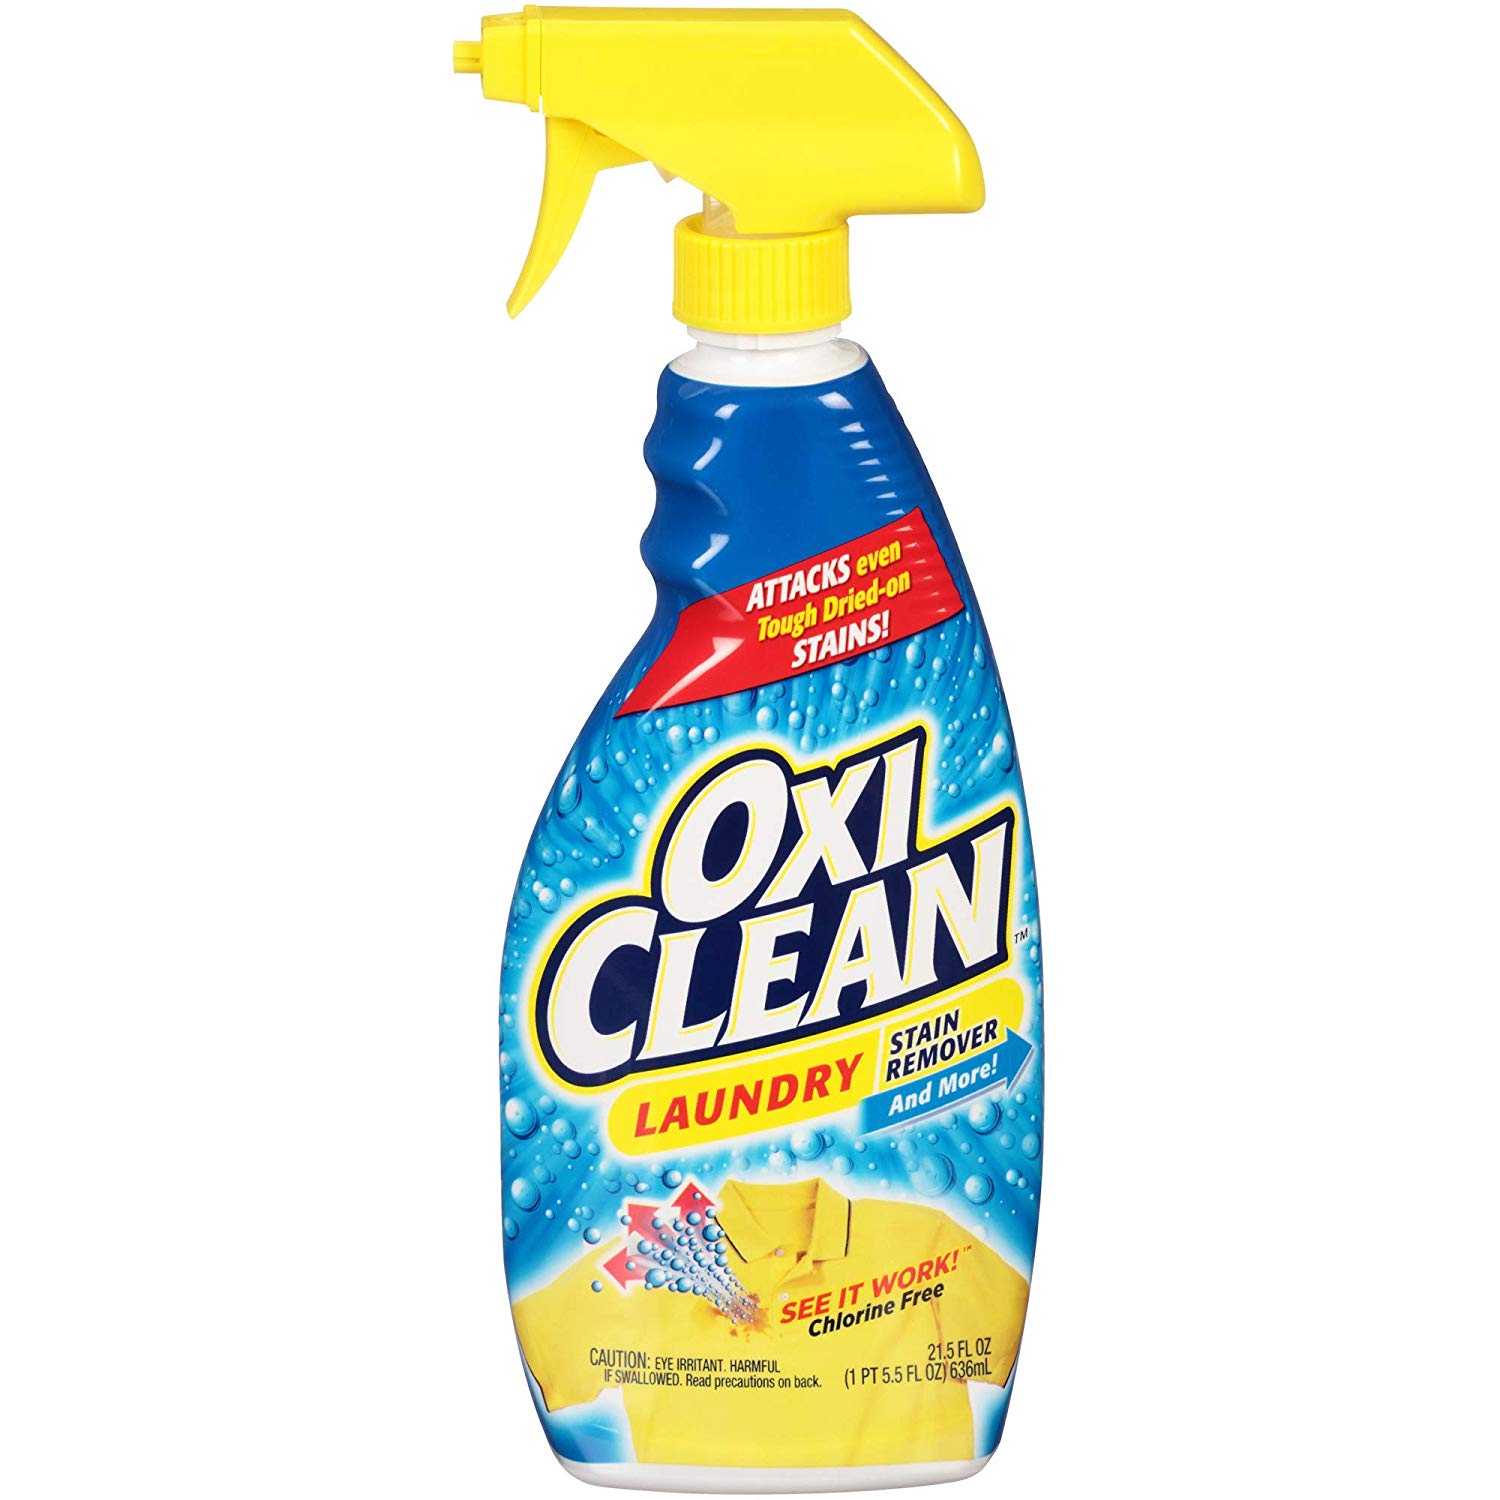 OxiClean Laundry Stain Remover Spray, 21.5 oz (8/cs)